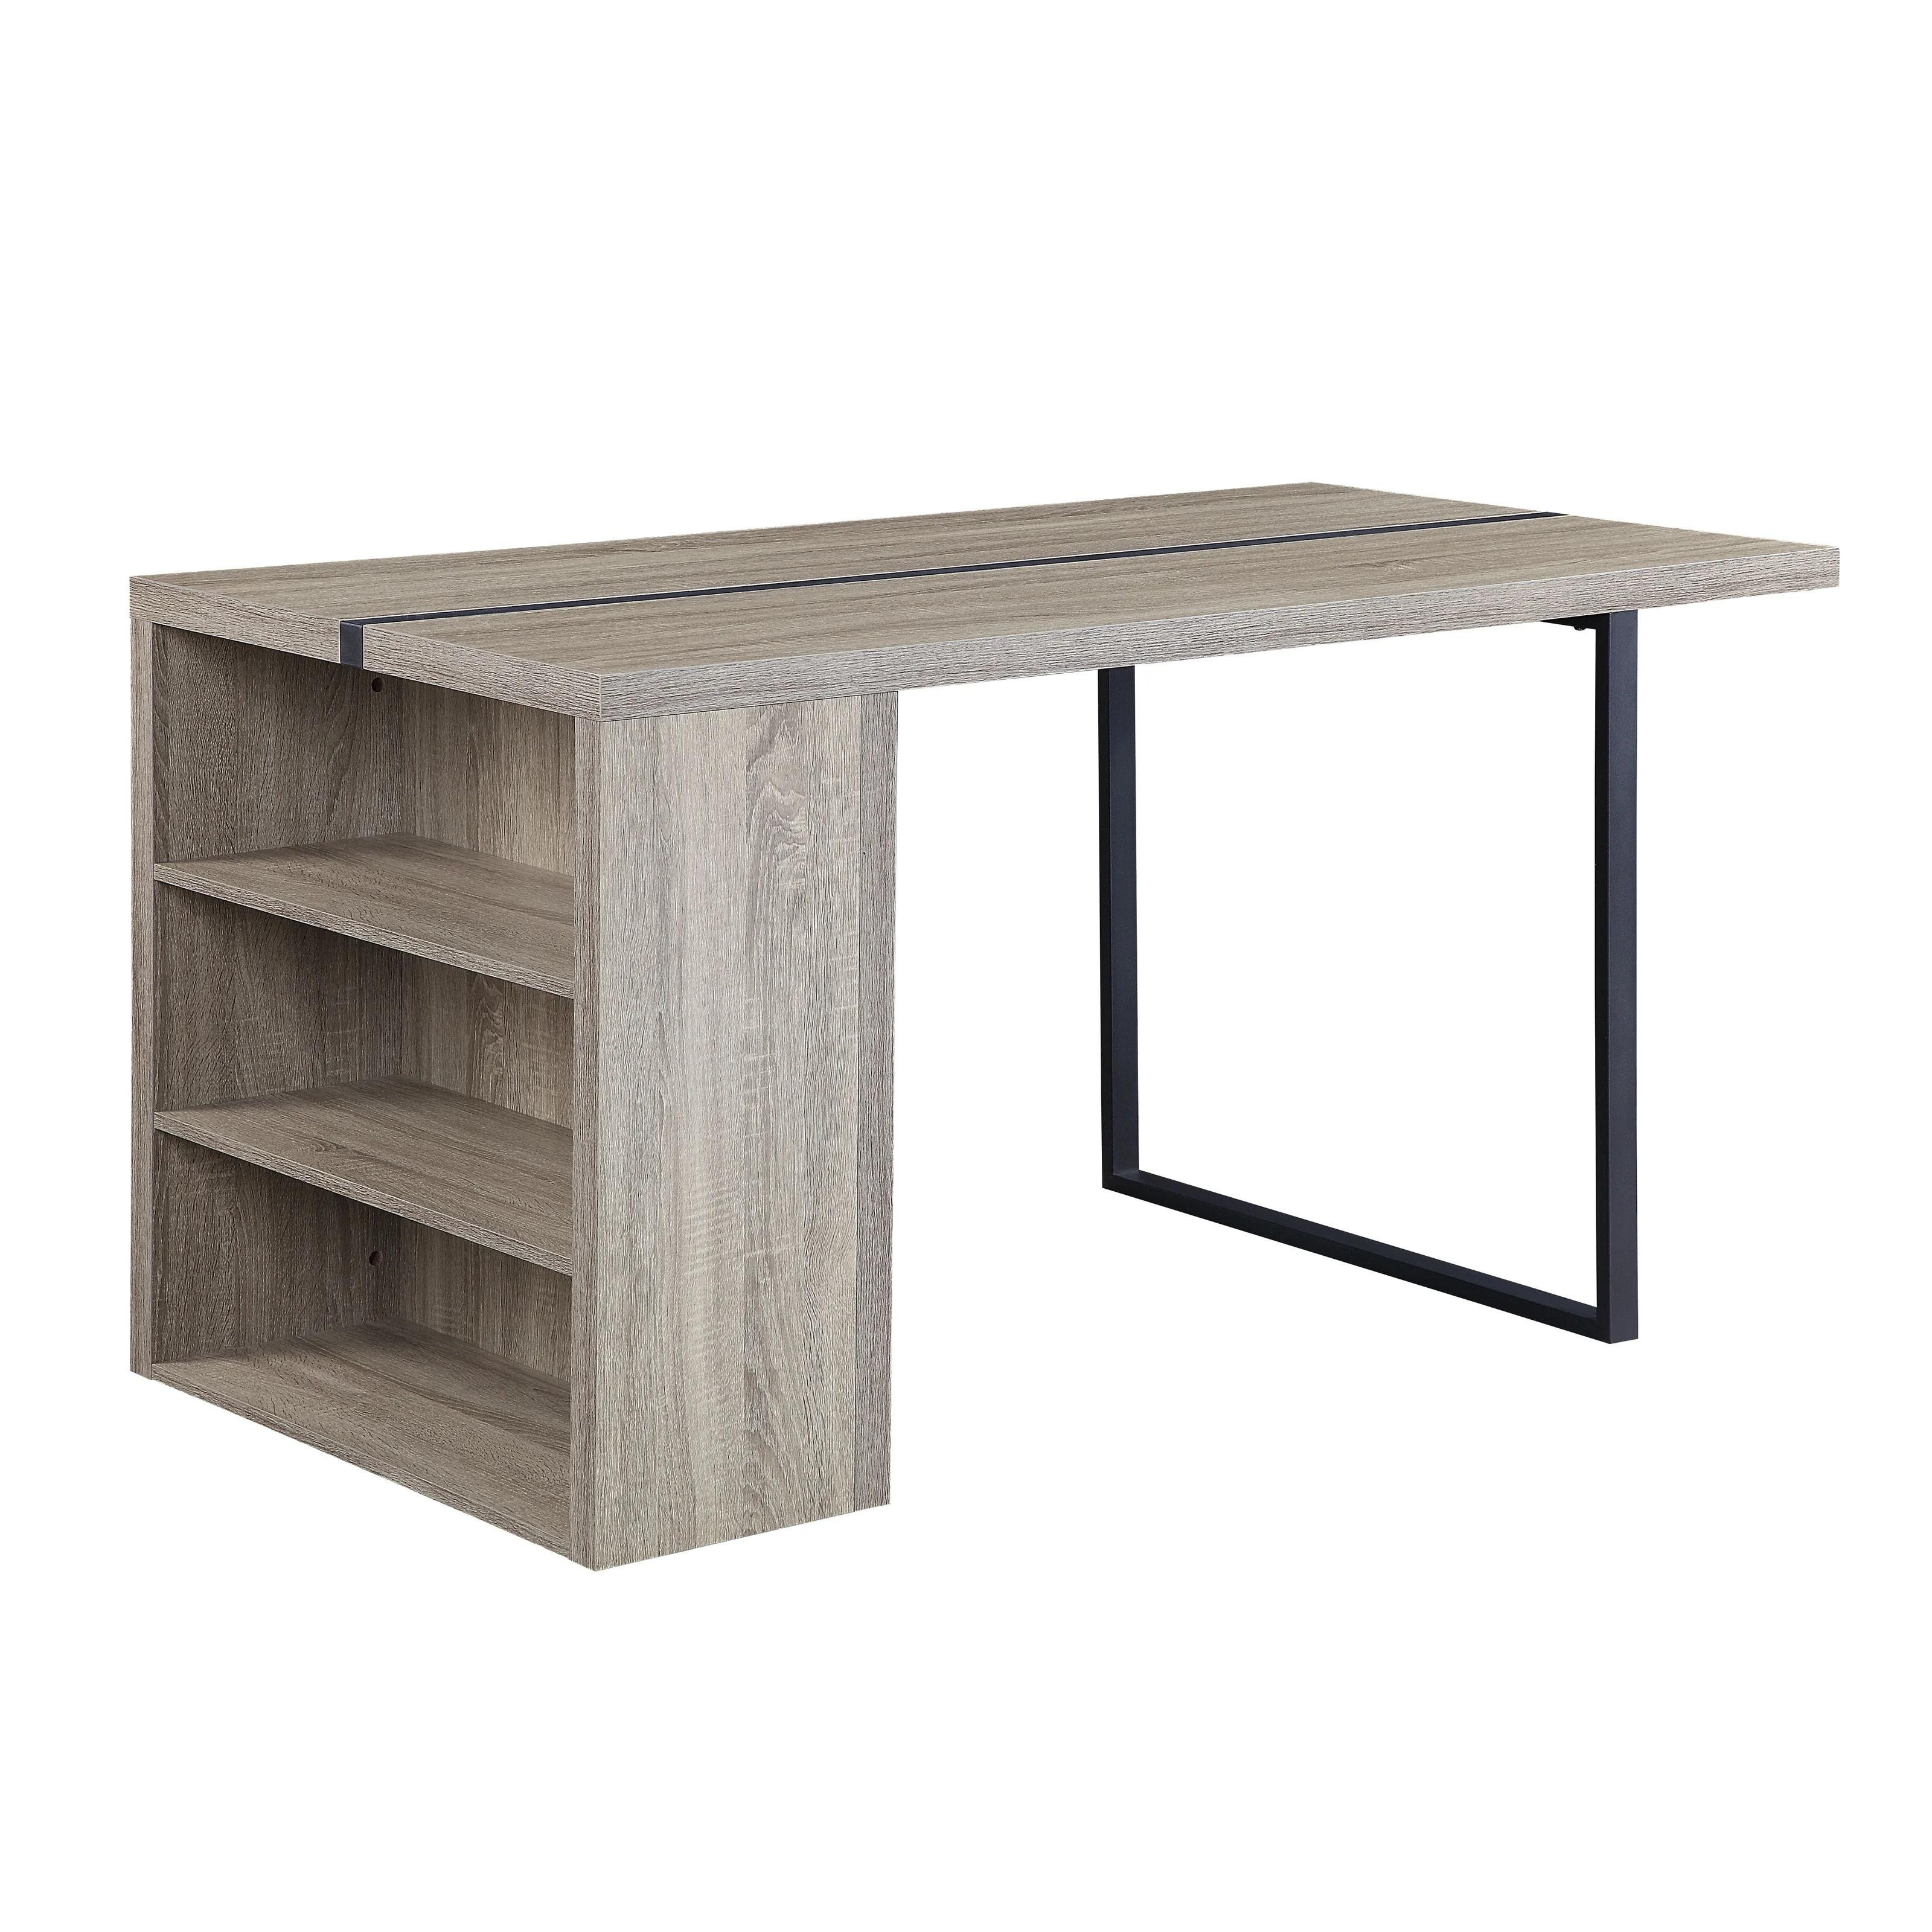 Contemporary Dining Table Patwin DN00401 in Wash Oak 